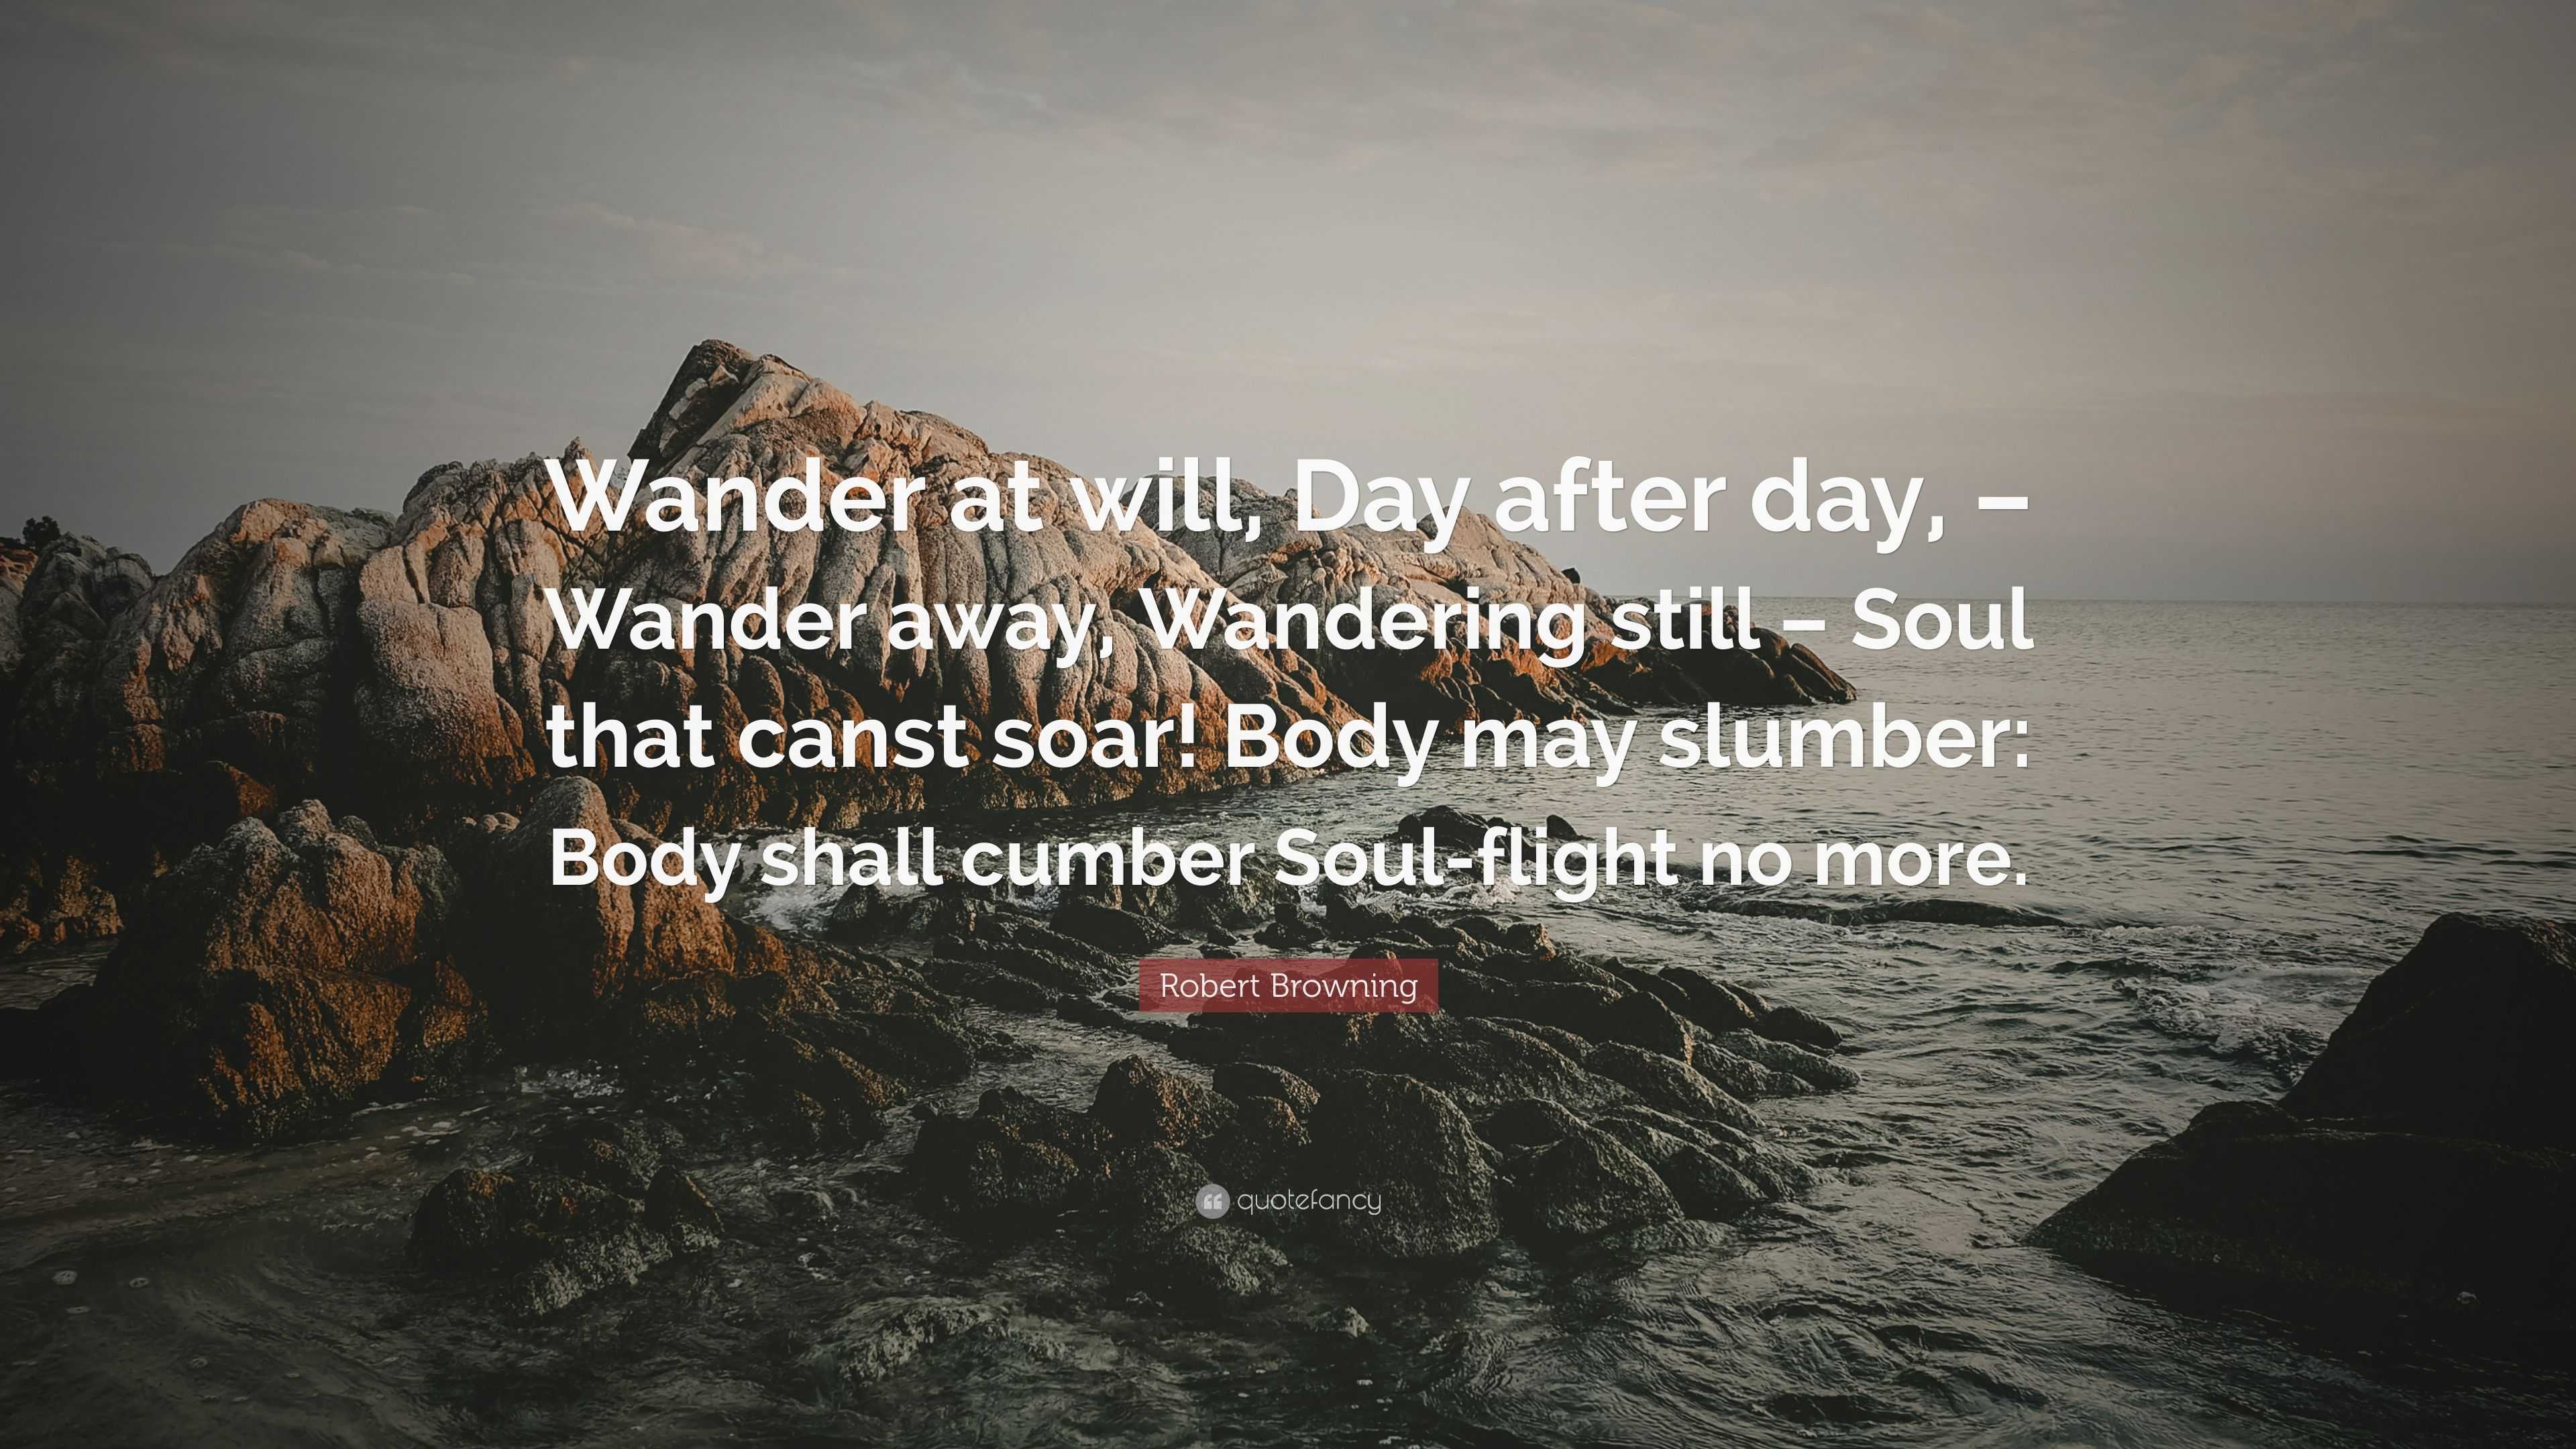 quotes on wandering soul